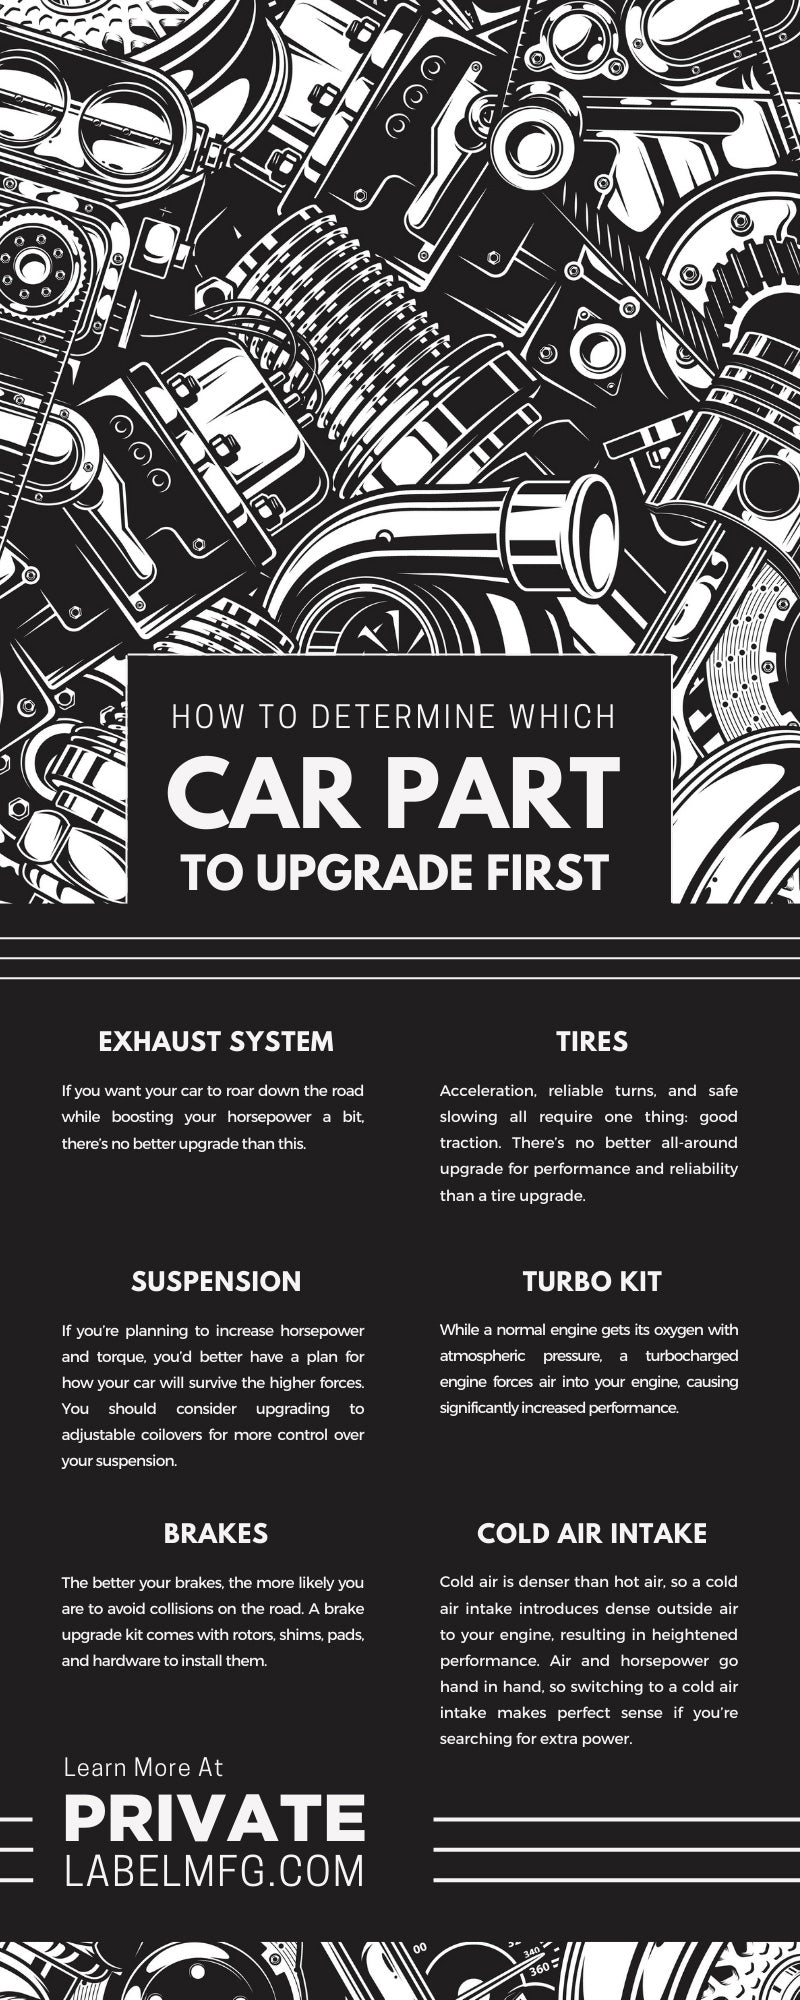 How To Determine Which Car Part To Upgrade First